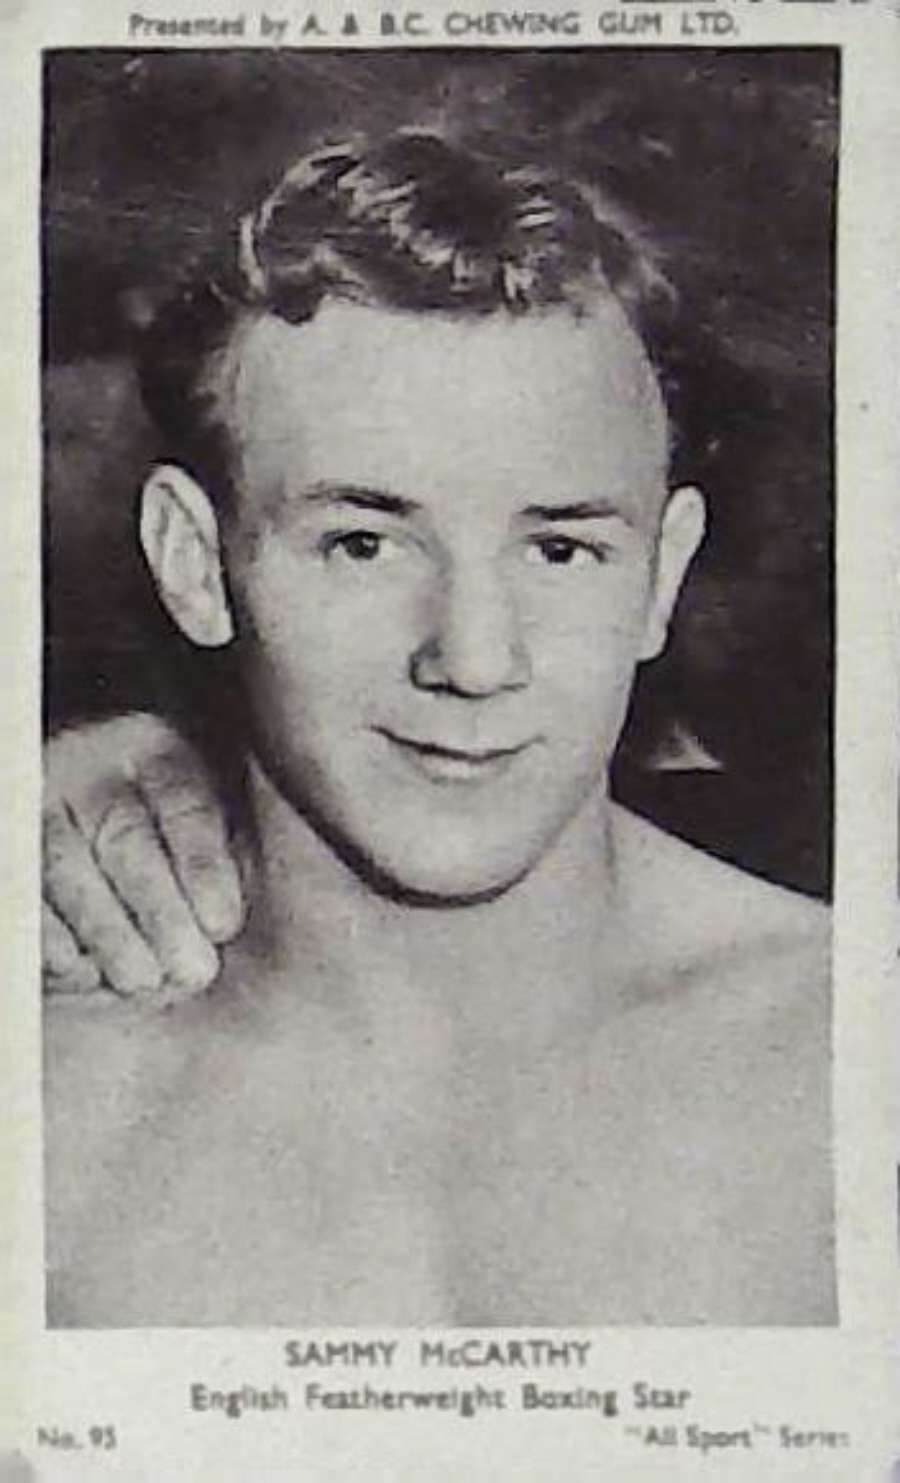 A & B C 1954 All Sports Boxing Sammy McCarthy Featherweight No 95 - Click Image to Close